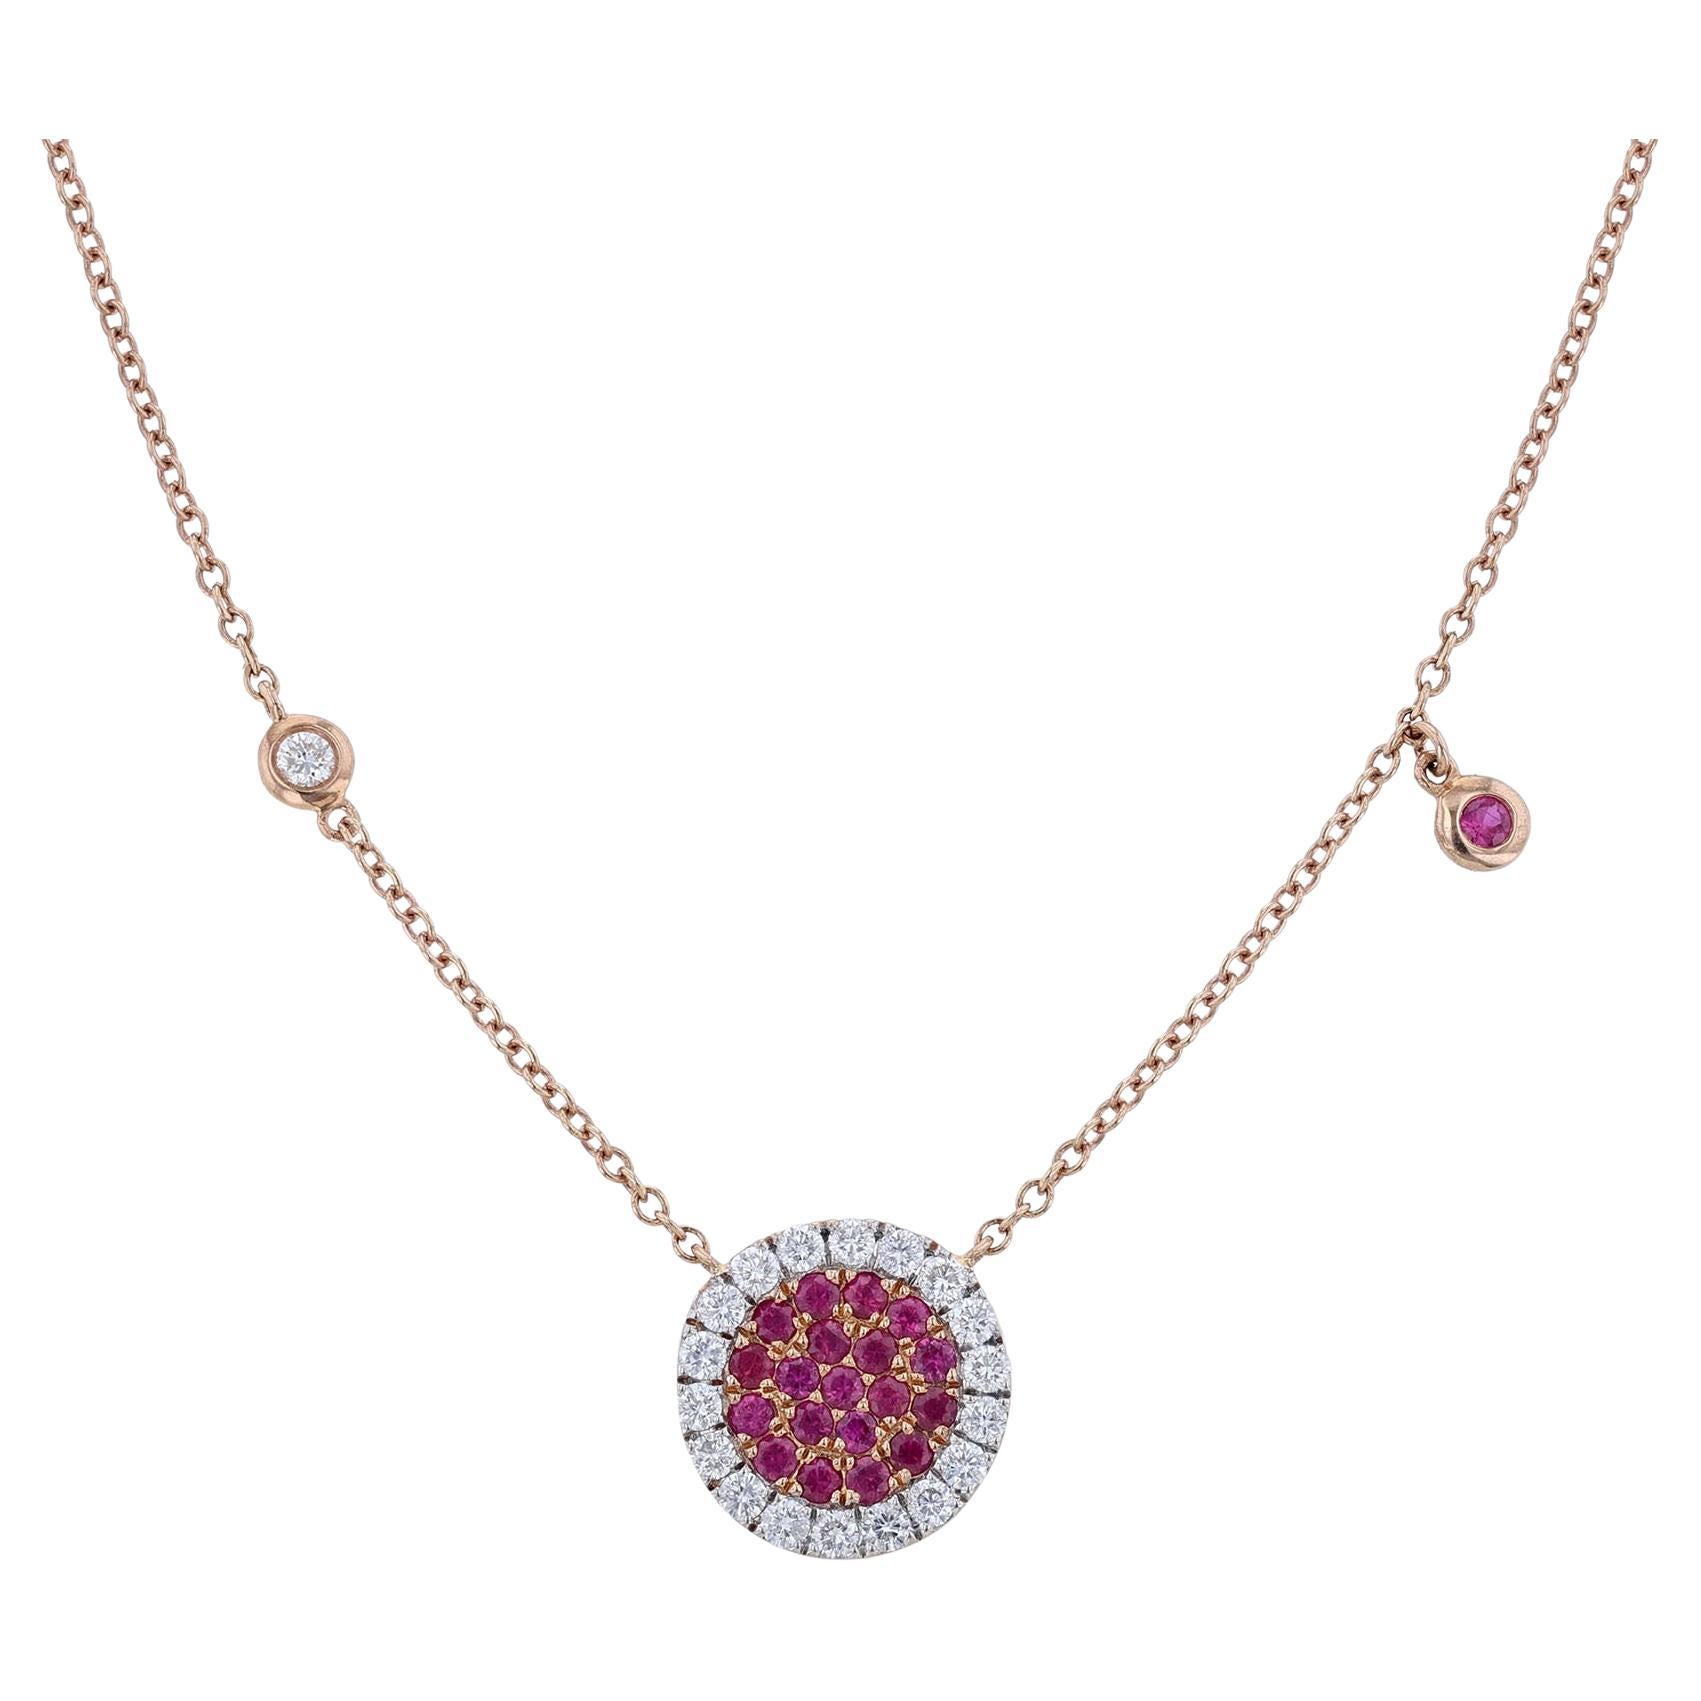 18K Rose Gold Rubies with Diamonds Round Pendant Necklace